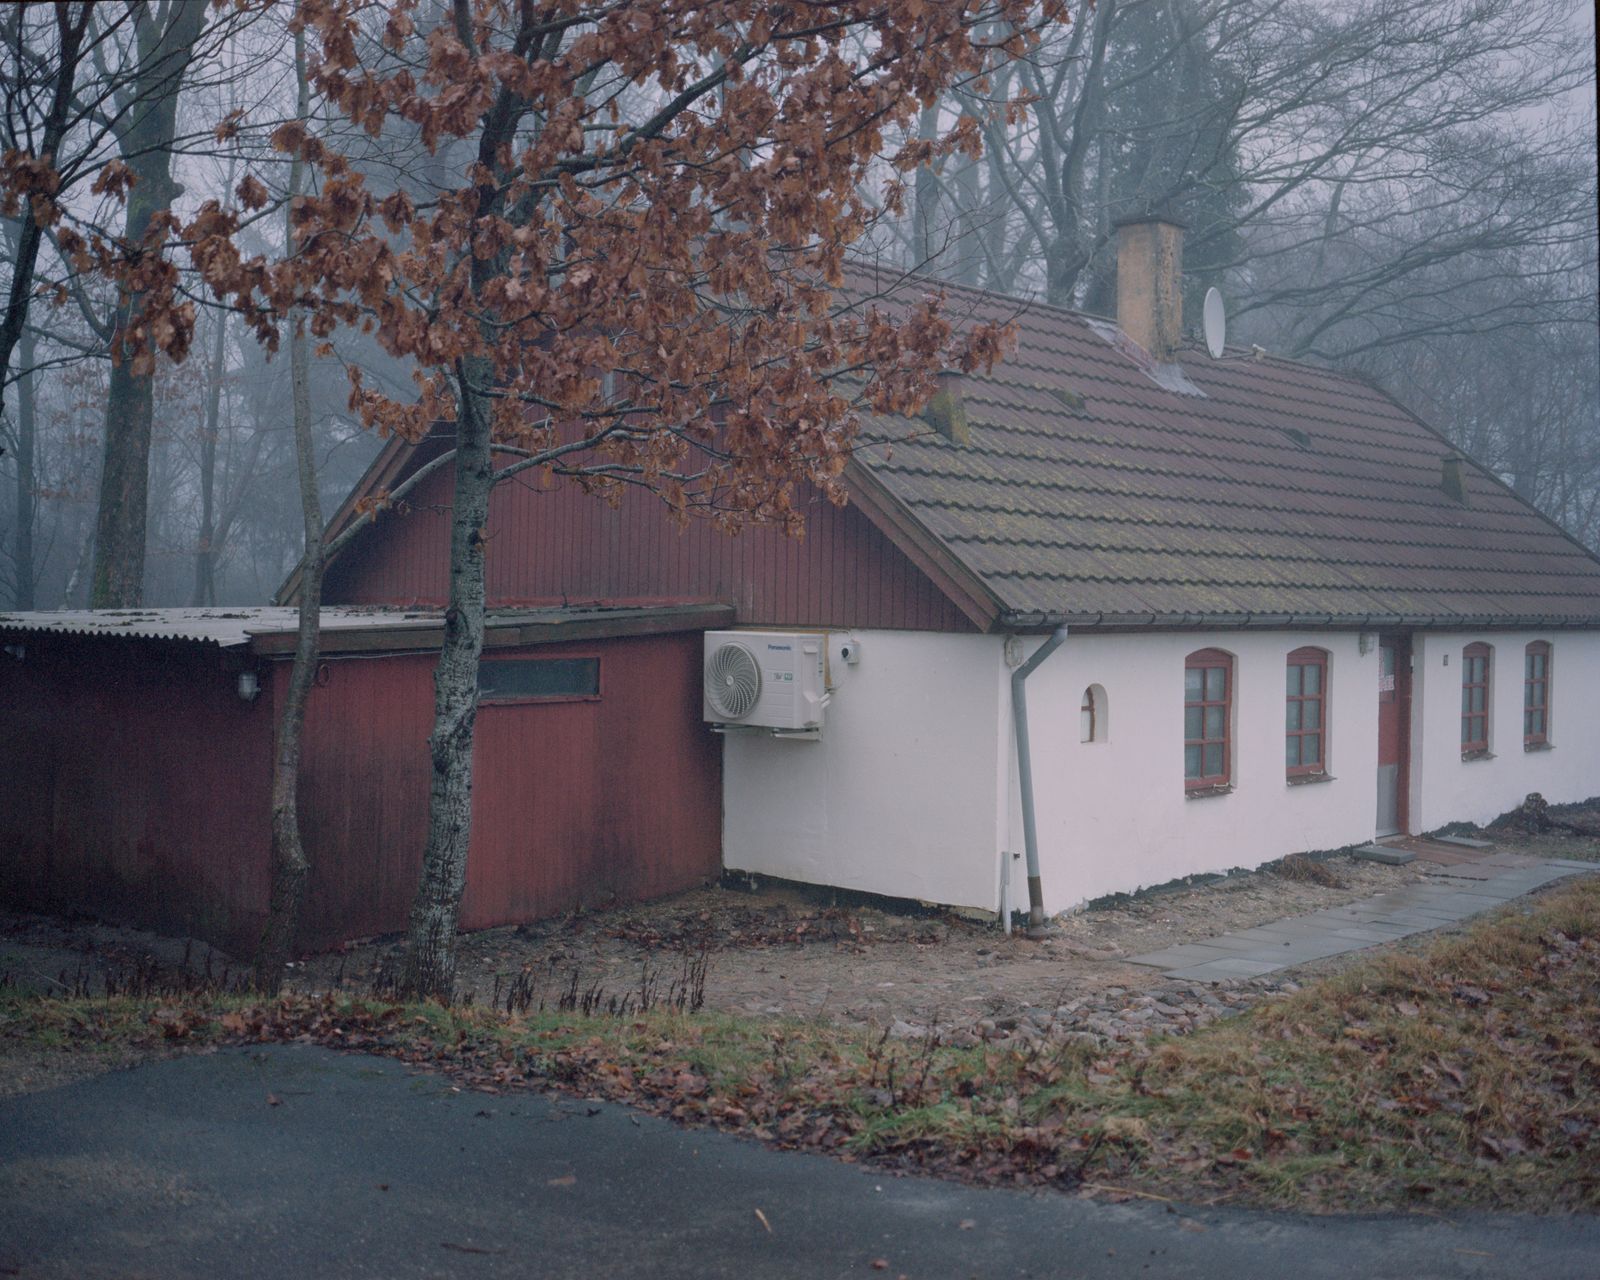 © Sarah Hartvigsen Juncker og Louise Herrche Serup - Image from the You still don't know my name photography project